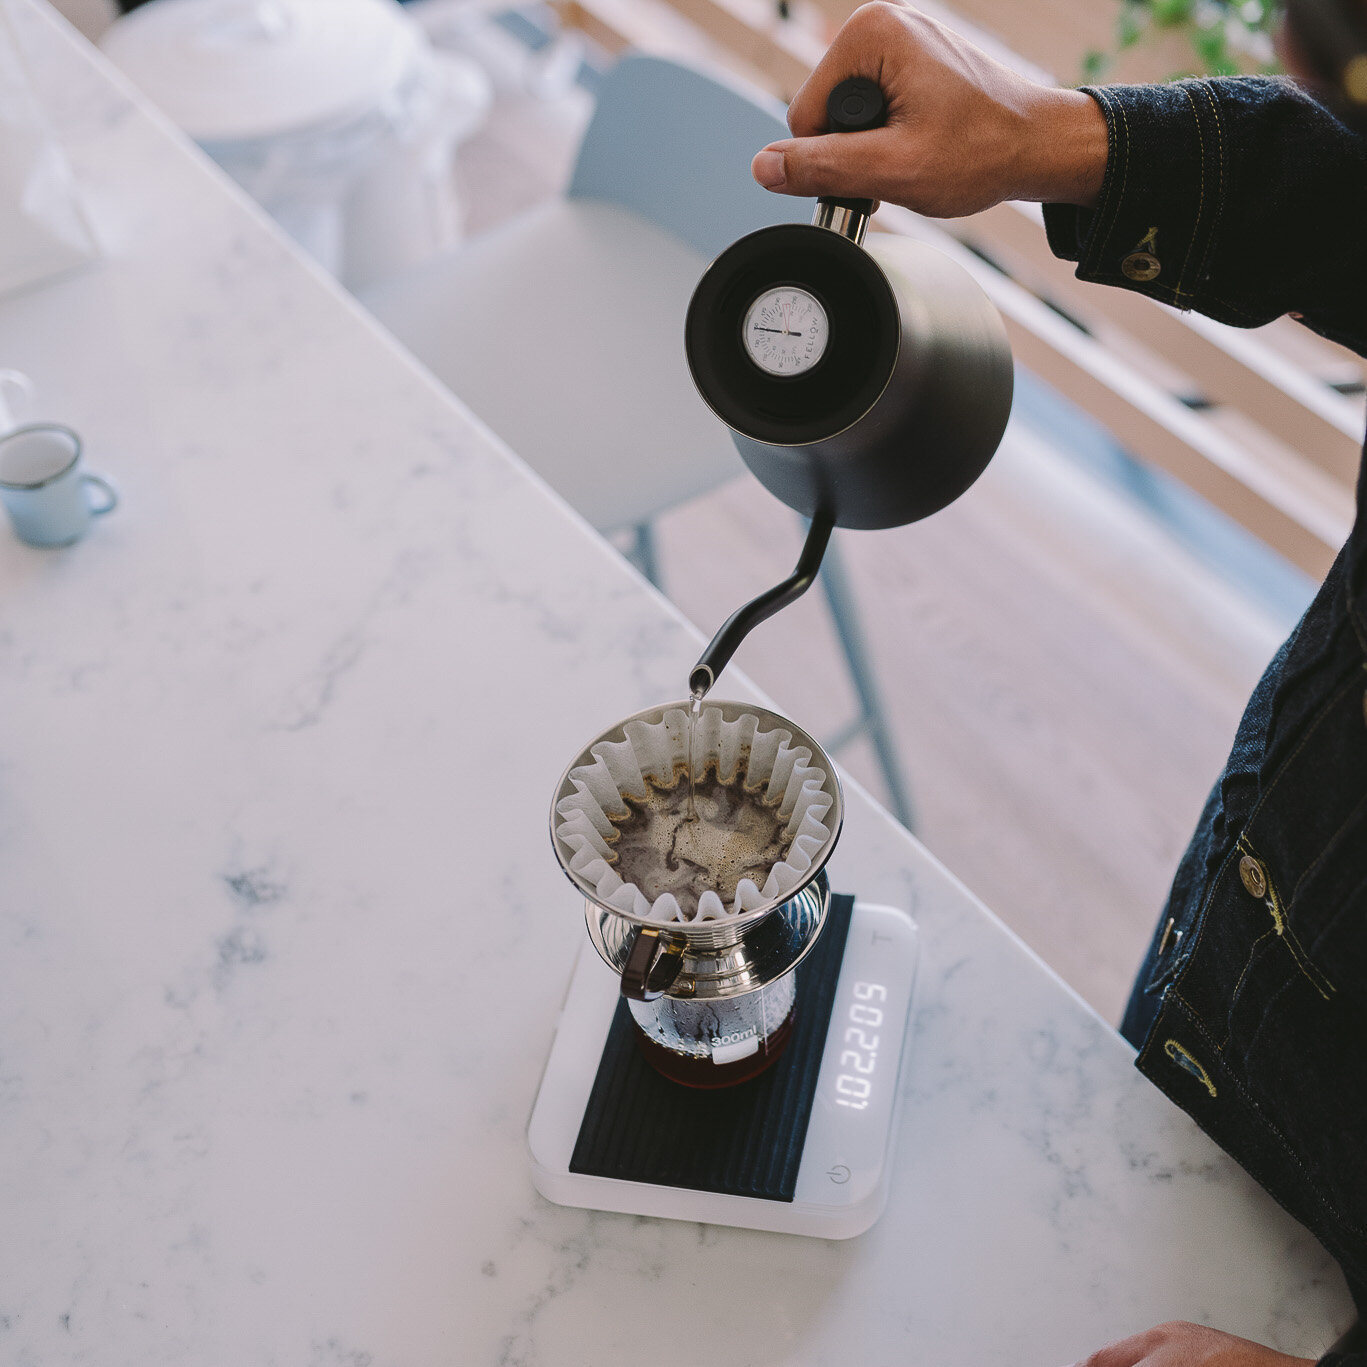 Adding coffee to V60 2 cup.